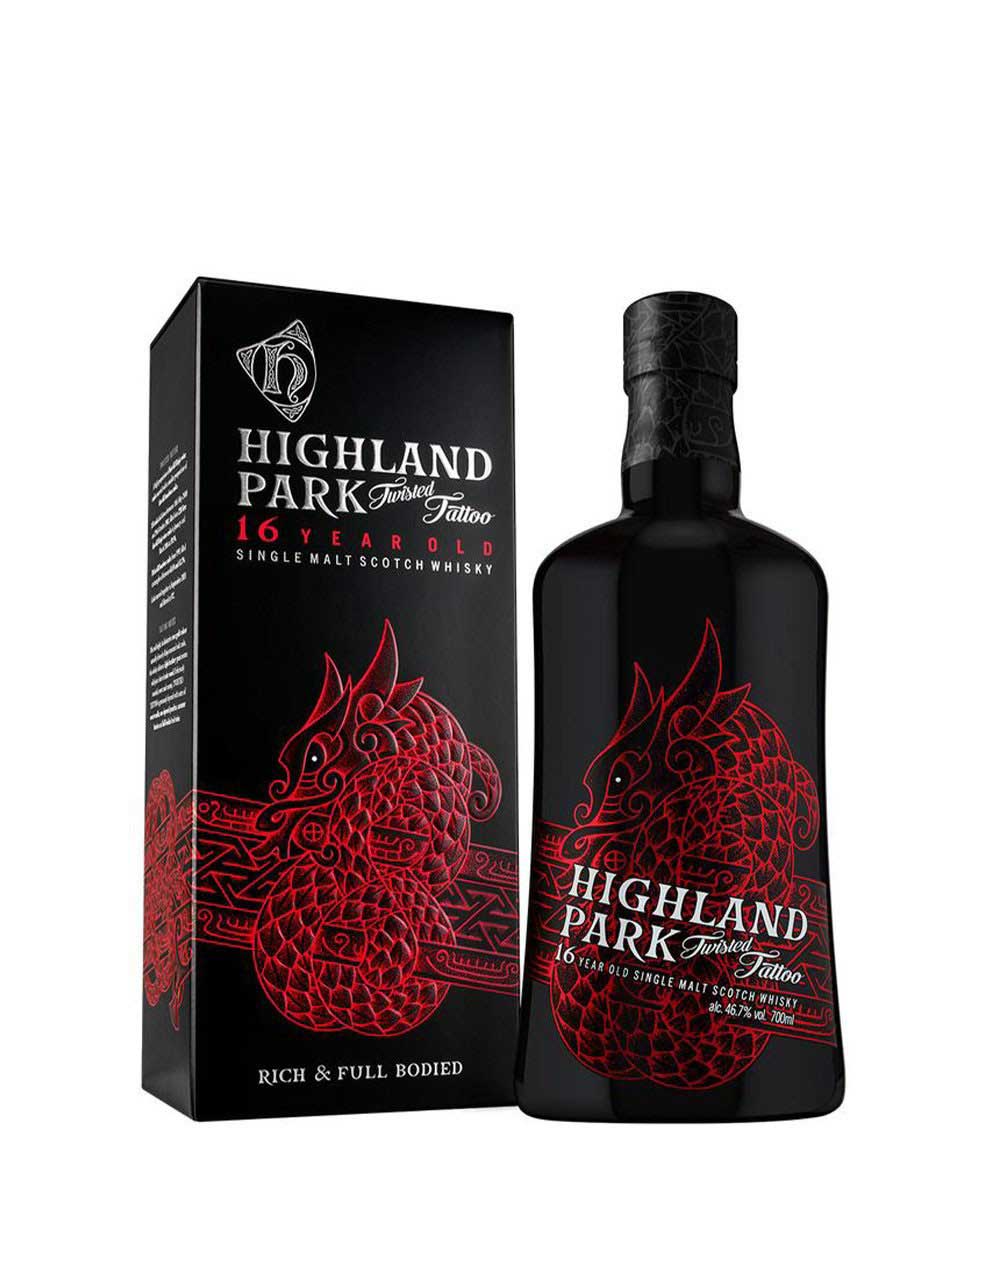 Highland Park Twisted Tattoo 16 Year Old